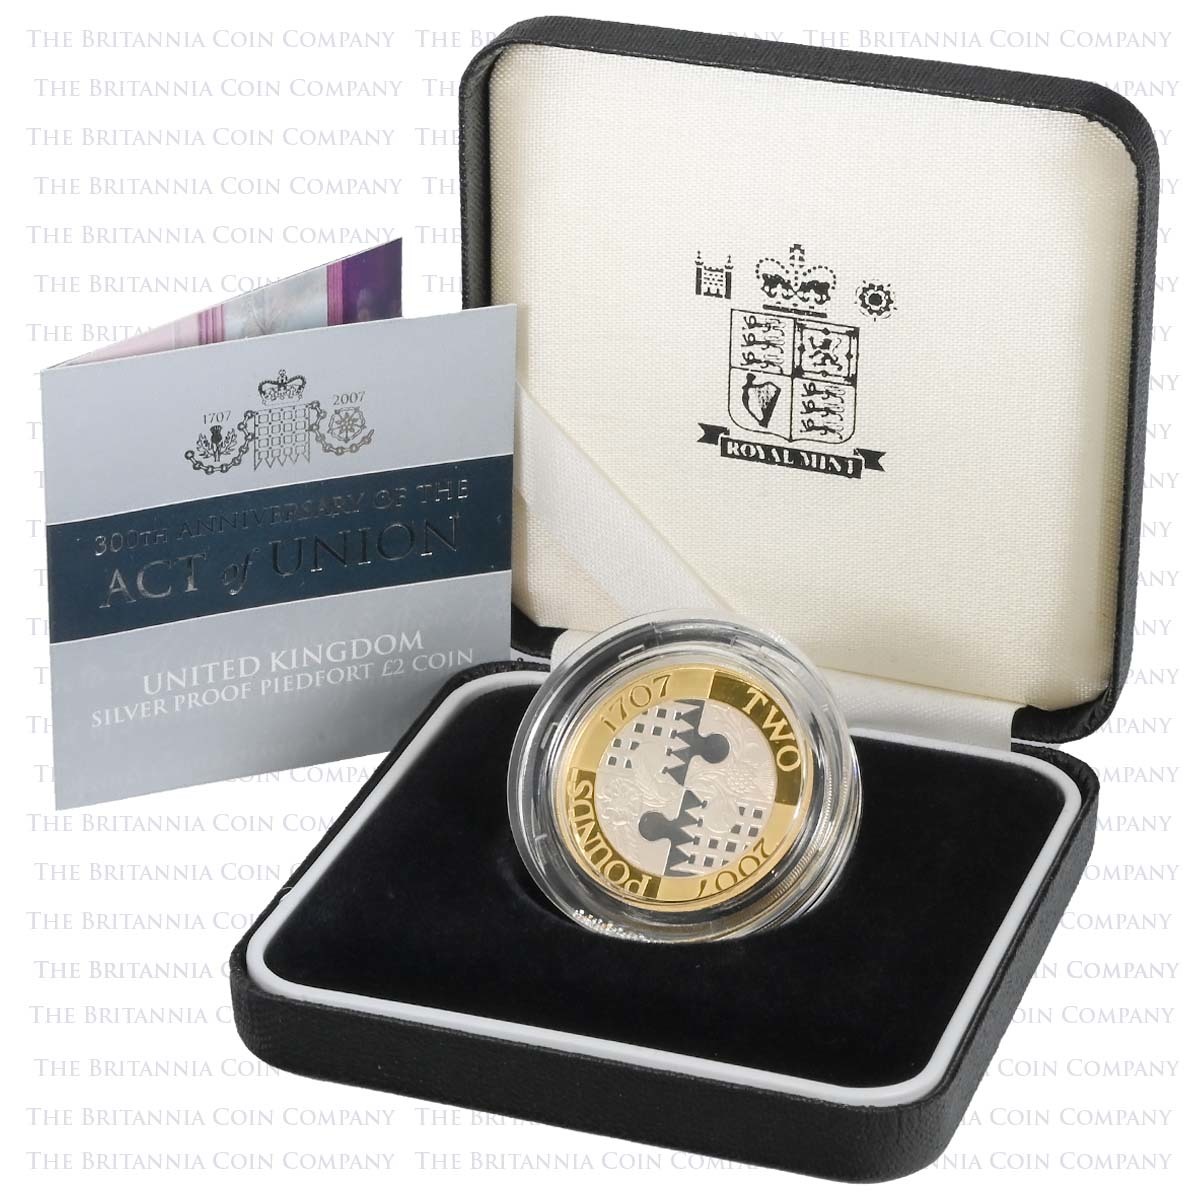 UKAOUPF 2007 Act Of Union 300th Anniversary Two Pound Piedfort Silver Proof Coin Boxed